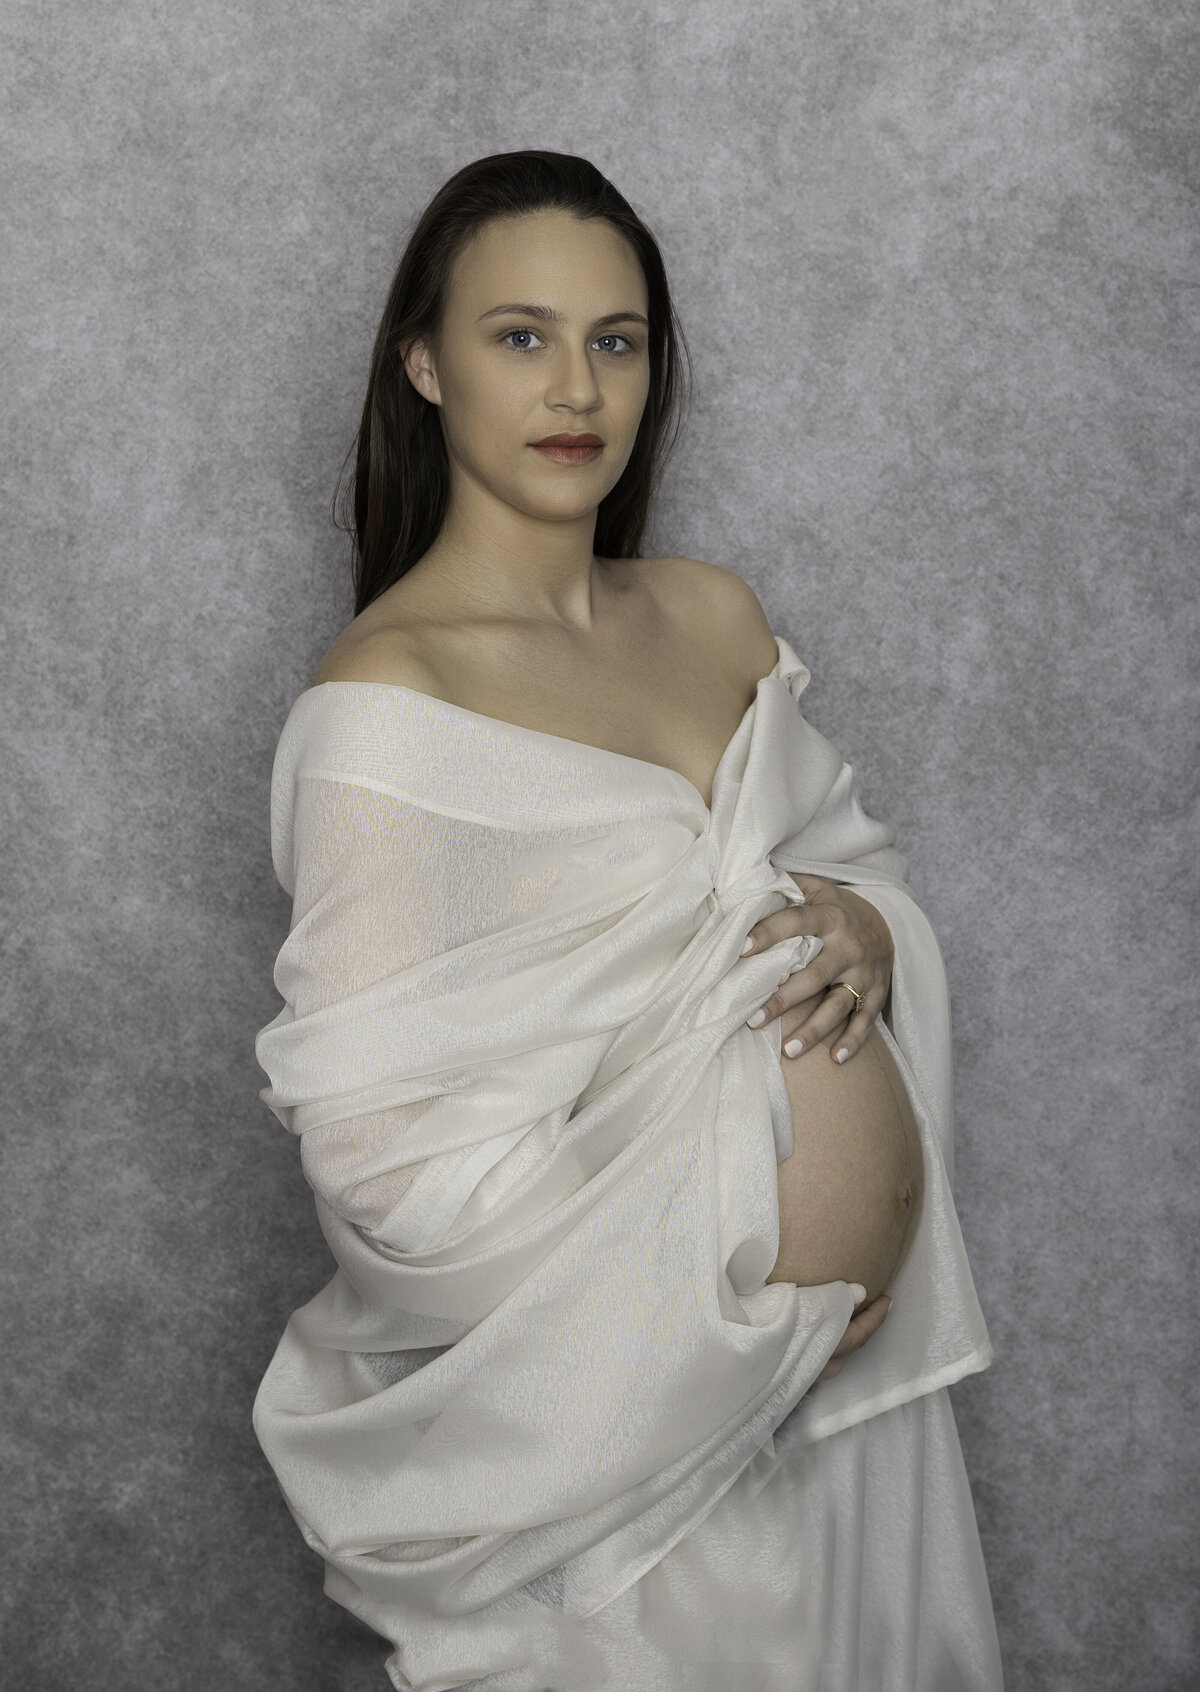 MATERNITY SESSION USING FABRIC WRAPS TO DRESS PREGNANT LADY